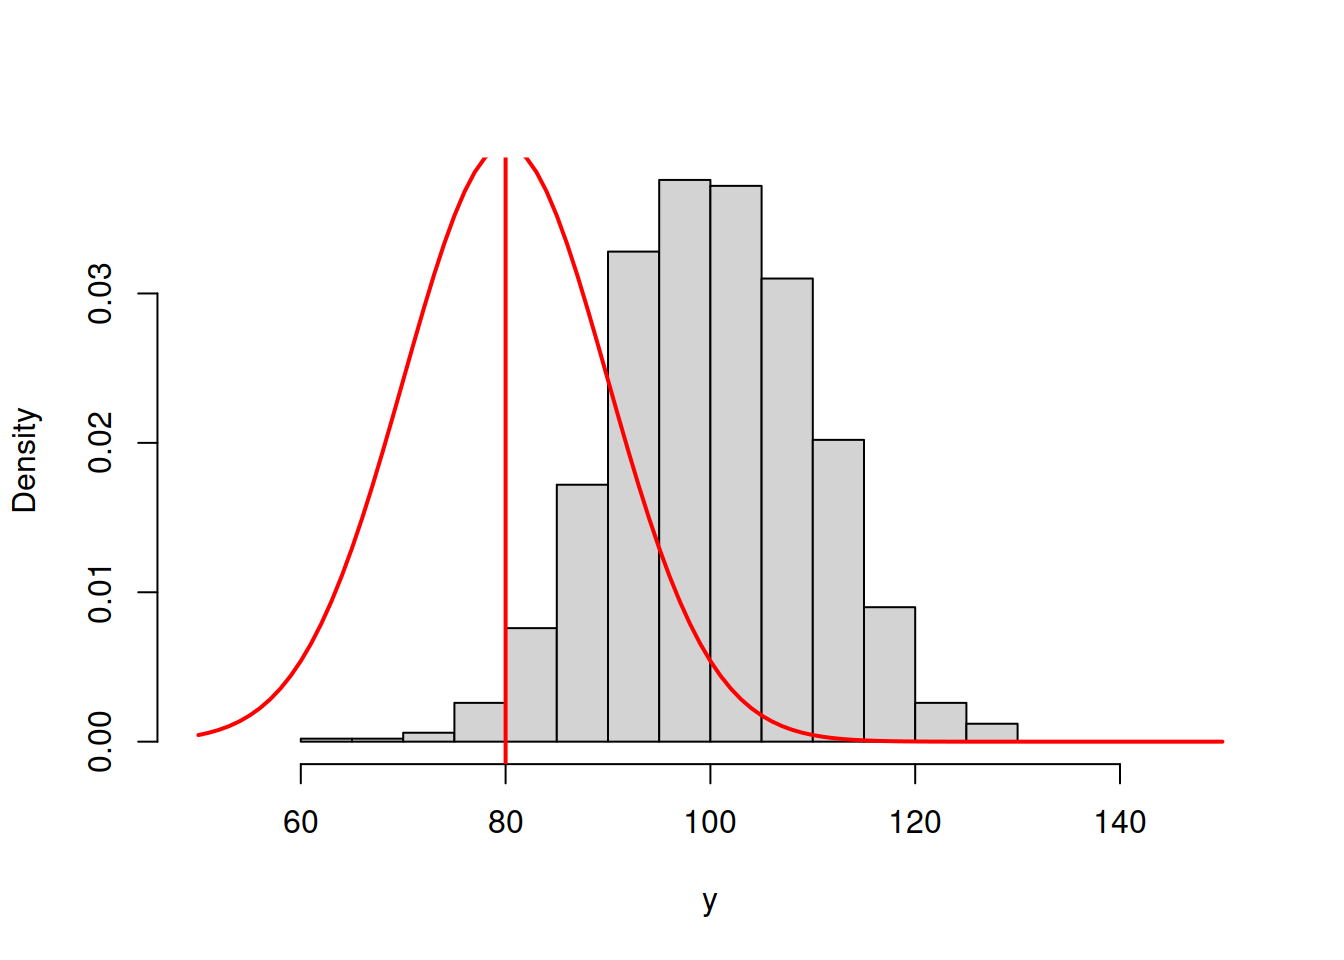 ML example with Normal curve and $\hat{\mu}_y=80$ and $\hat{\sigma}=10$